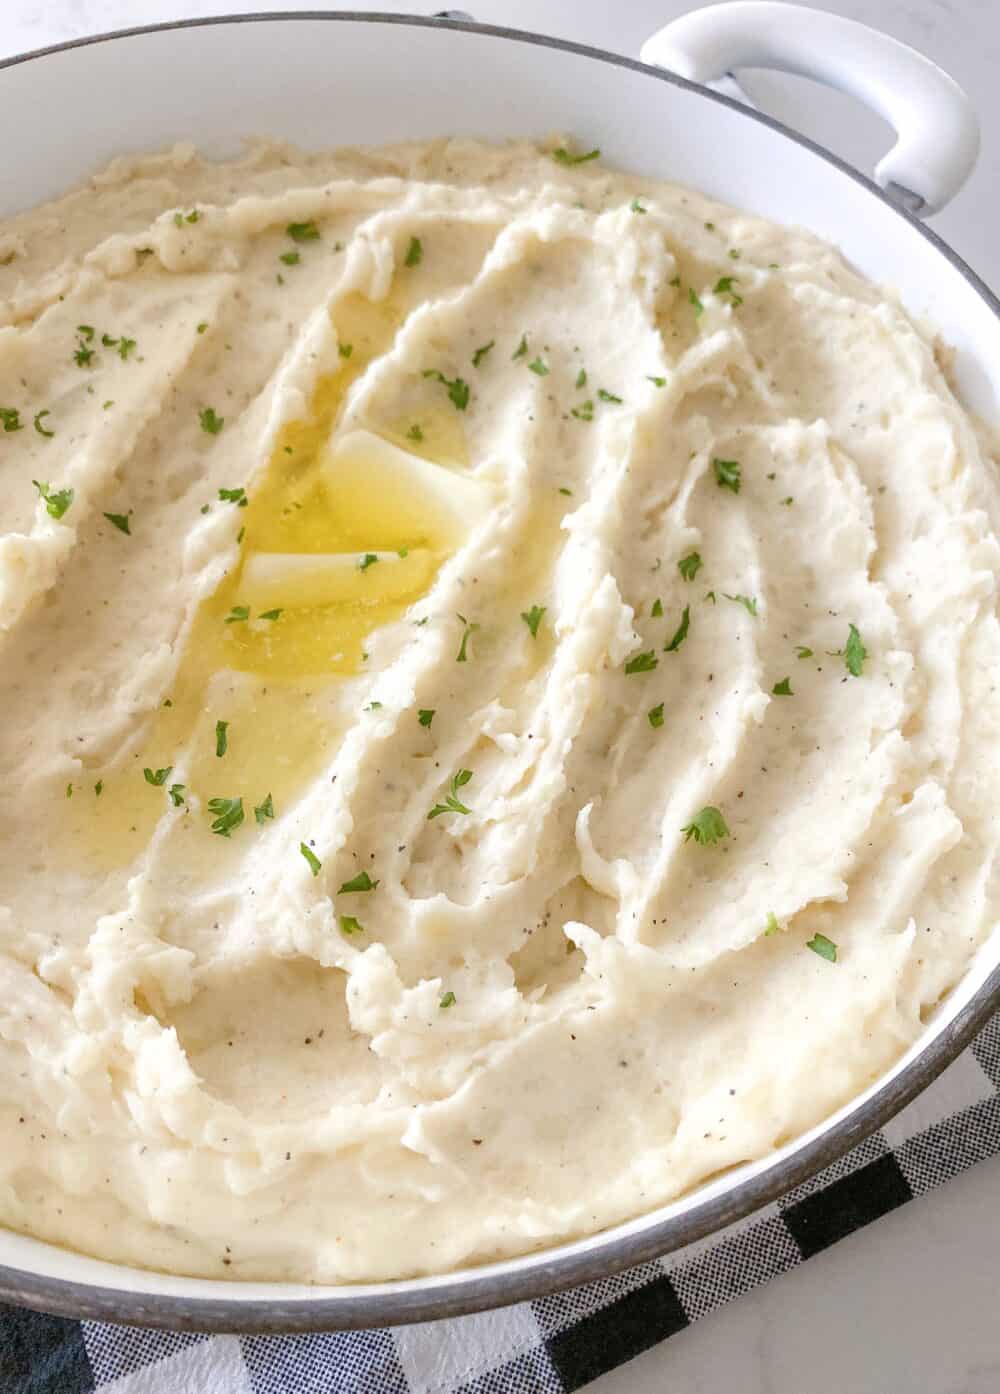 mashed potatoes in serving dish